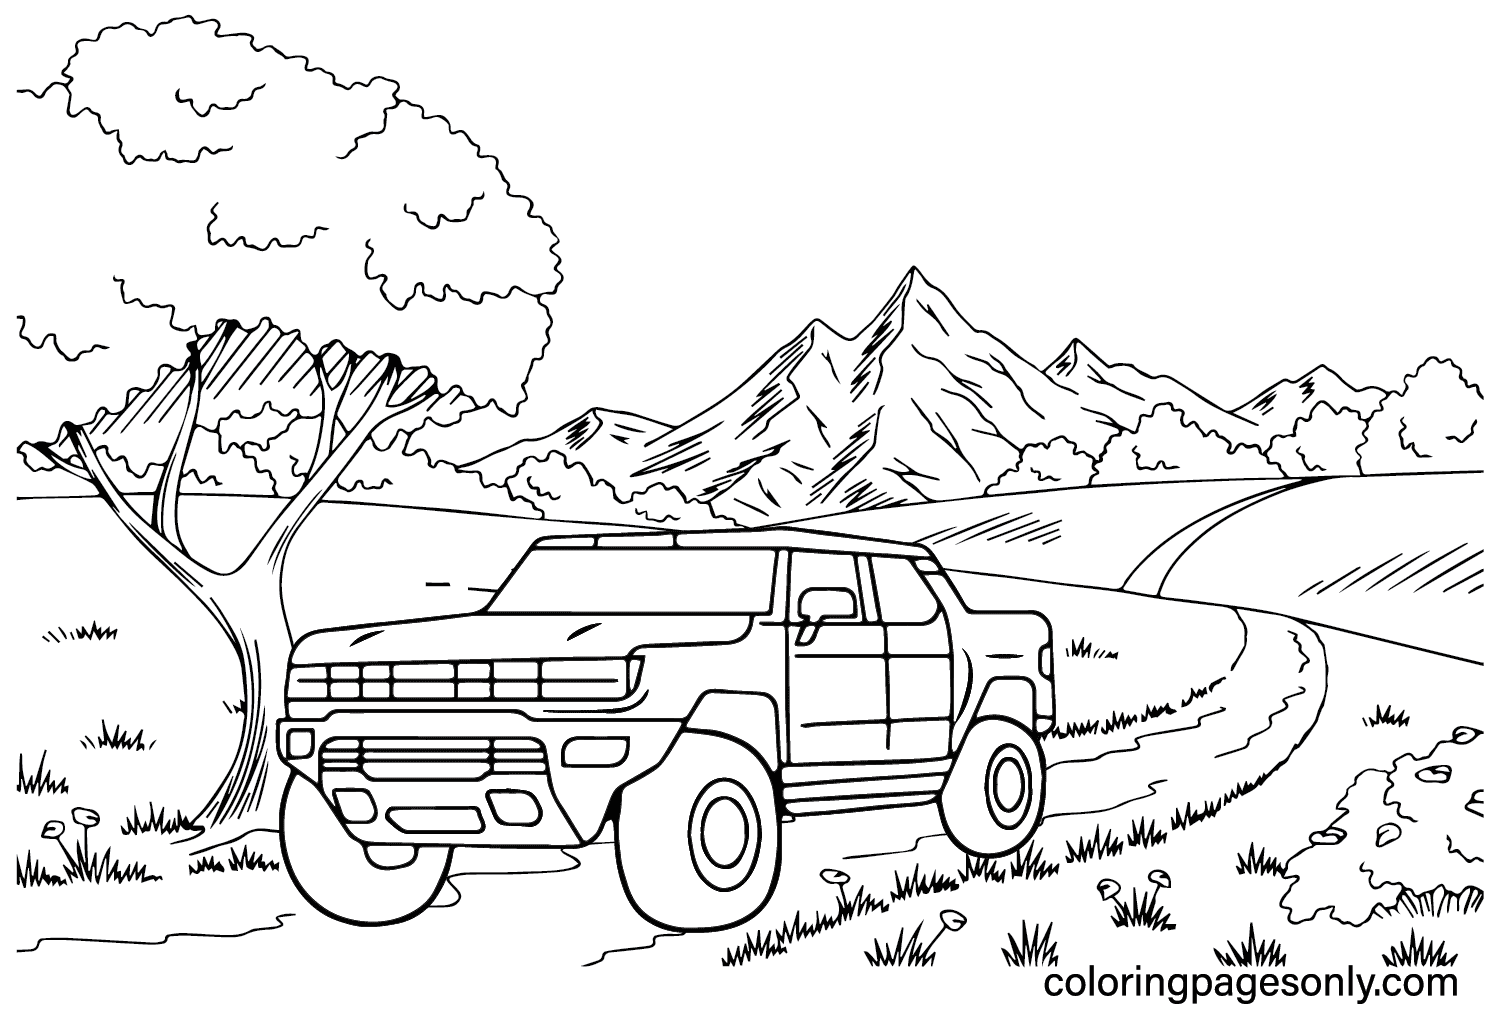 Hummer EV Coloring Page from Hummer